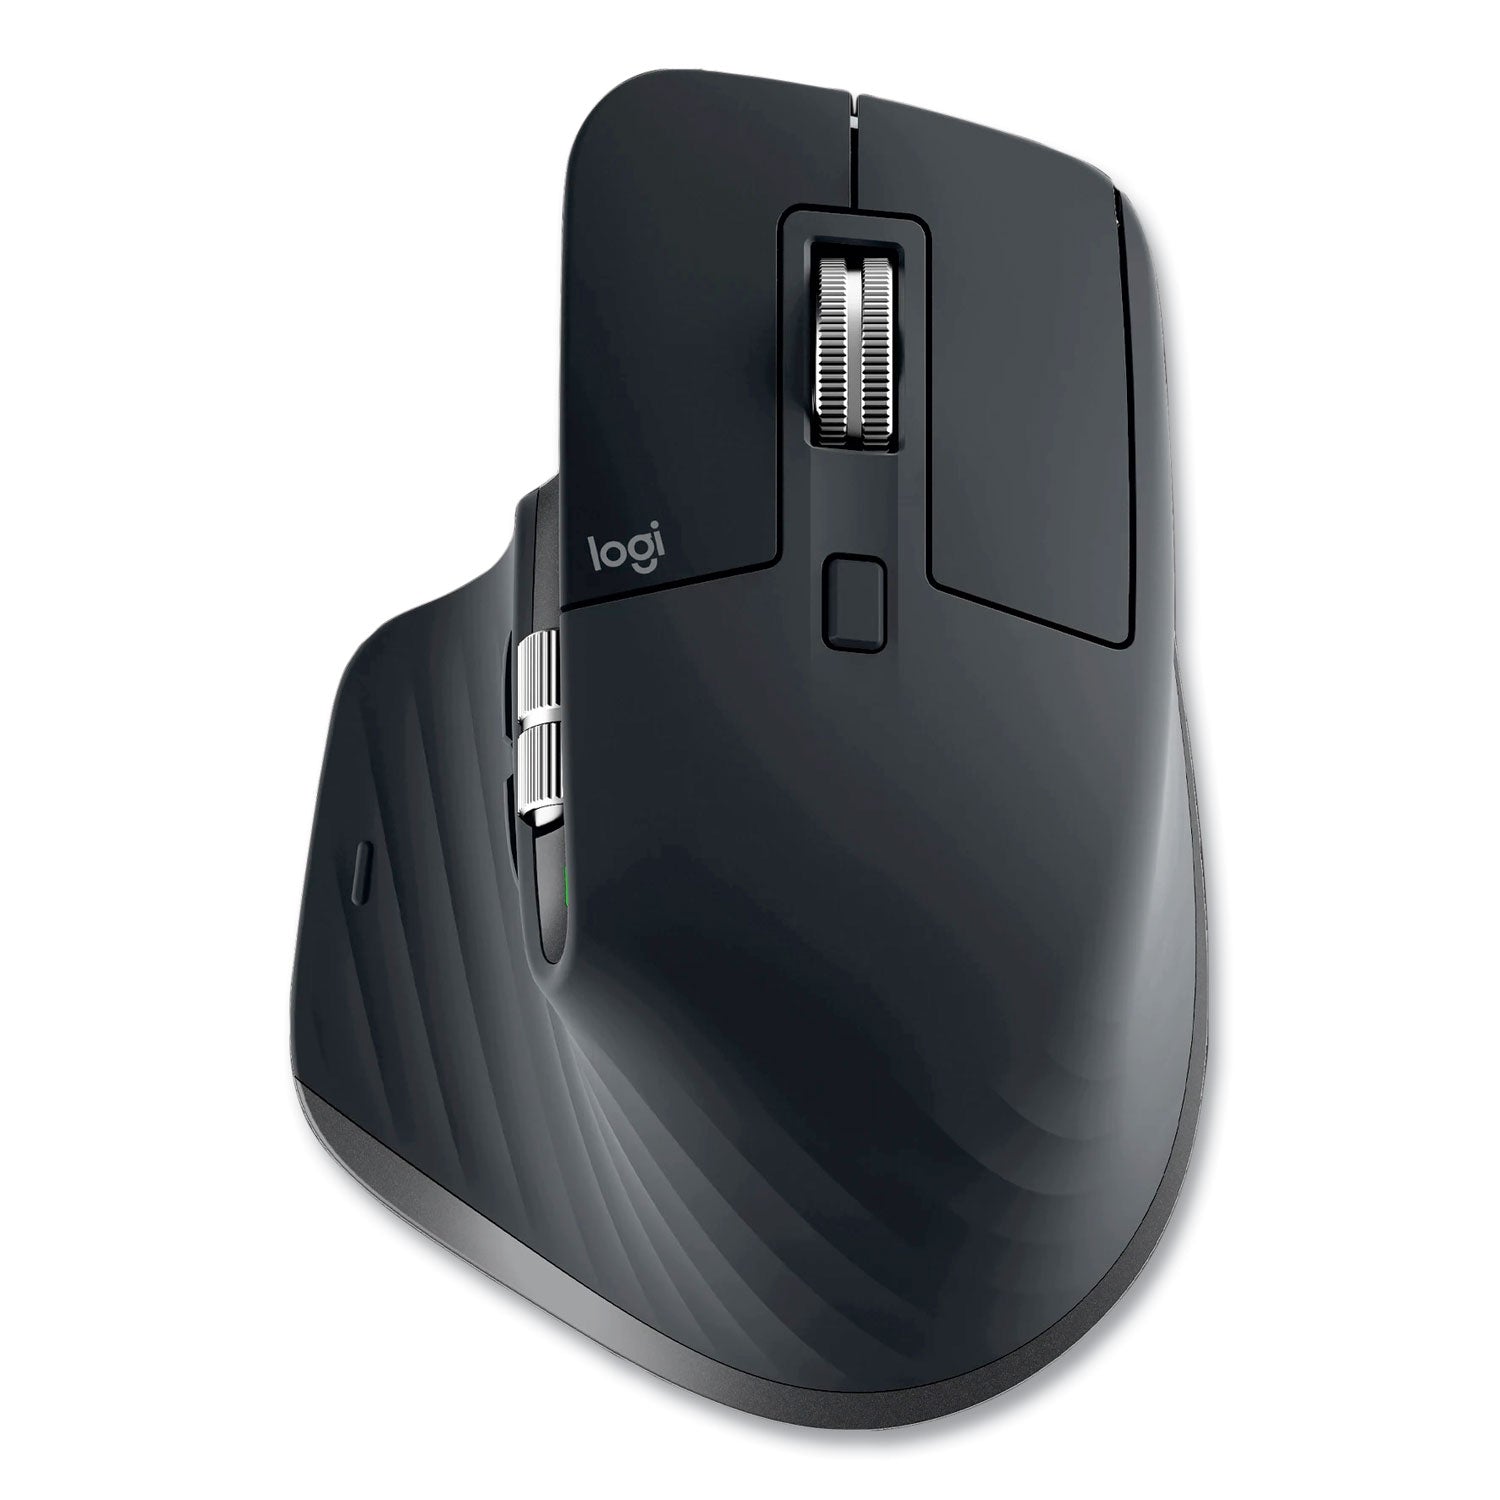 mx-master-3s-performance-wireless-mouse-24-ghz-frequency-32-ft-wireless-range-right-hand-use-black_log910006556 - 1